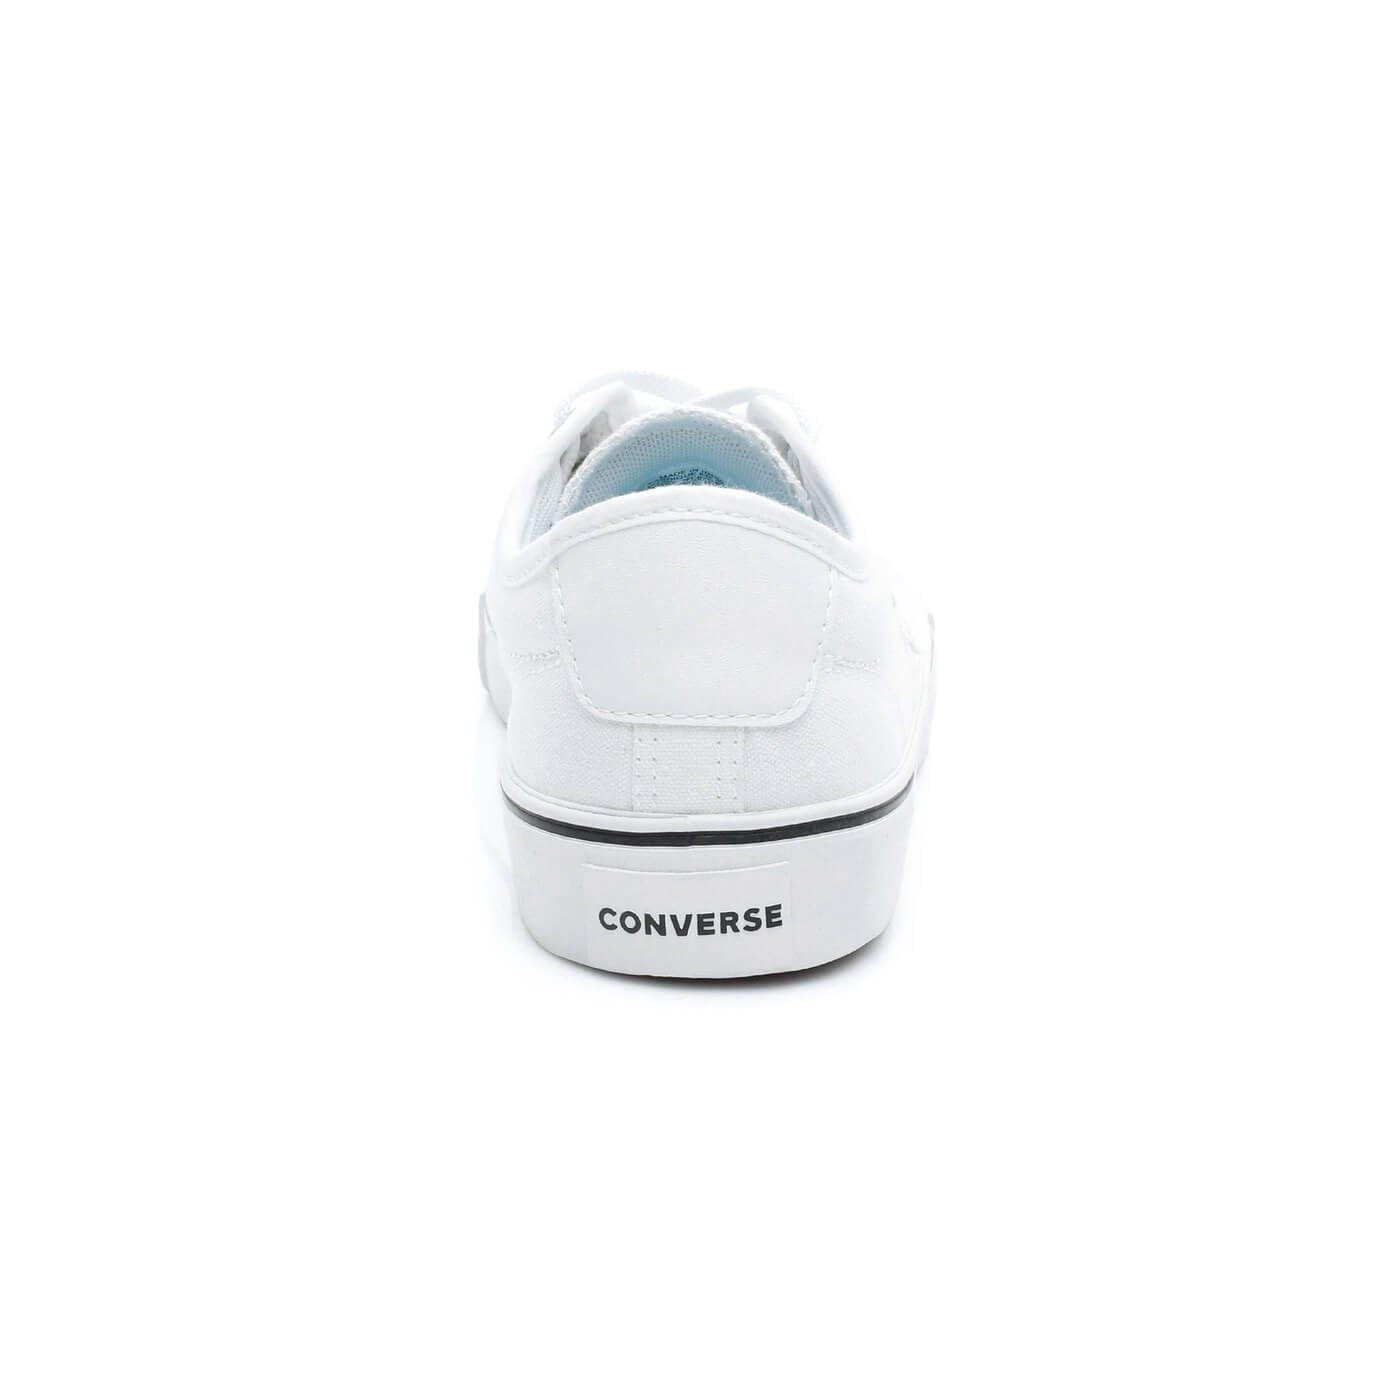 Converse Star Replay Star of the Show Unisex White Canvas Shoes 10.5/1 –